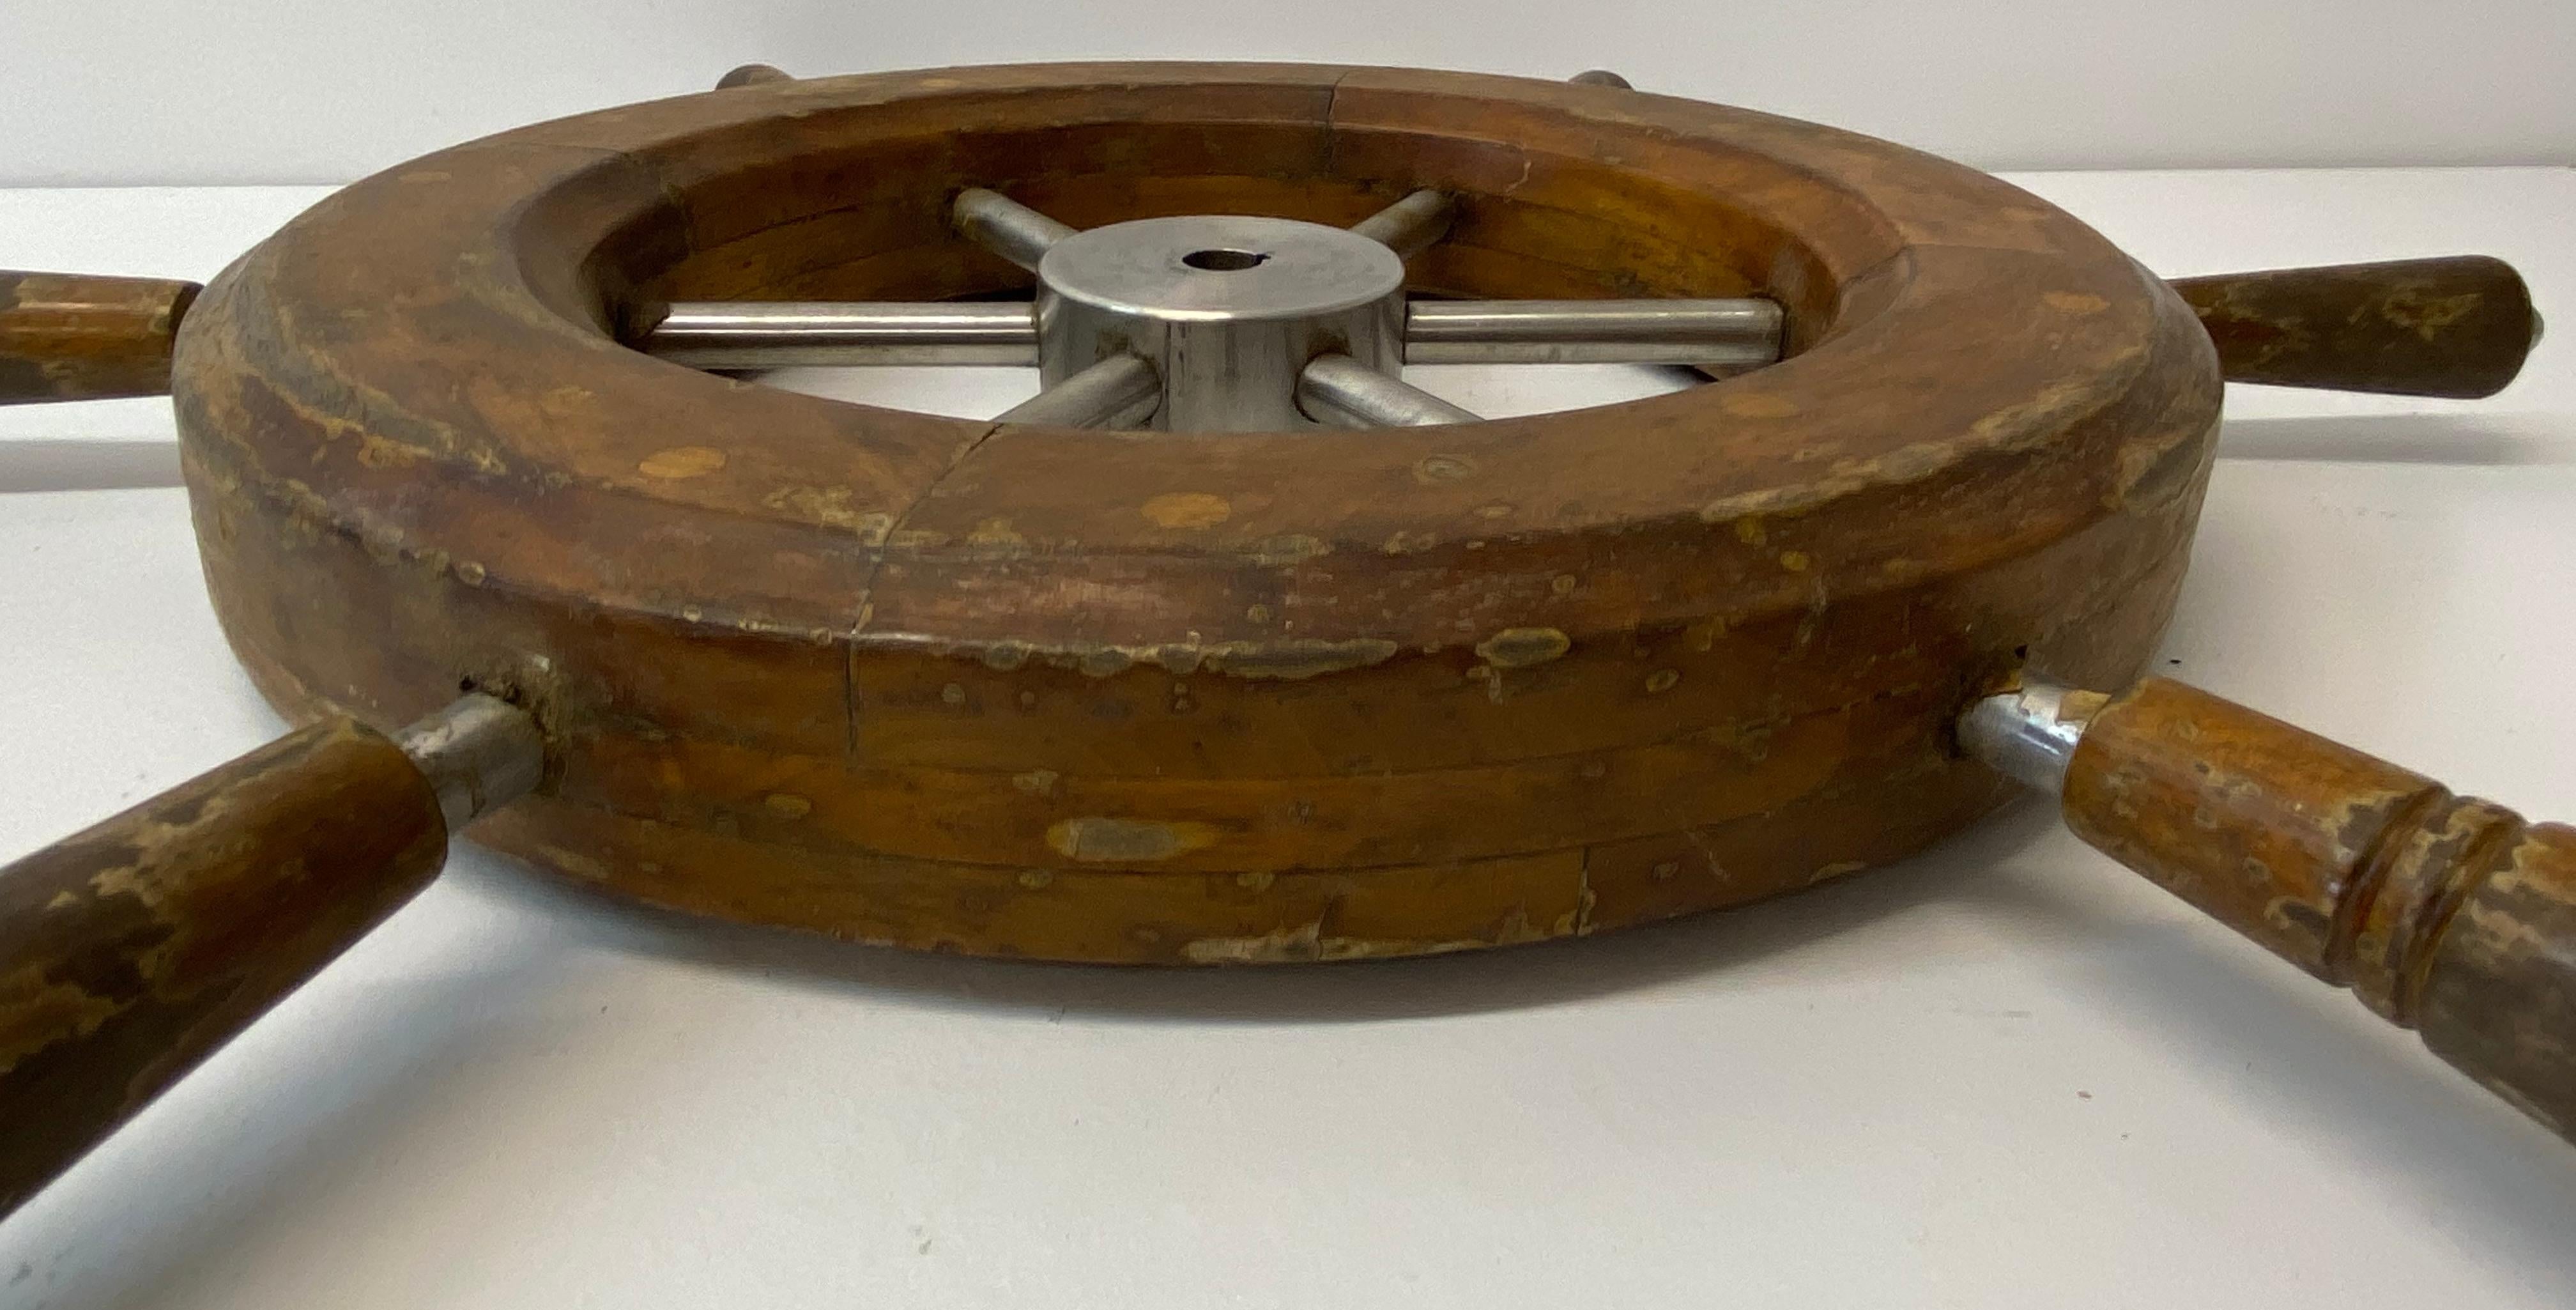 Early to Mid 20th Century Teak and Aluminum Ships Wheel 1930s to 1950s For Sale 4